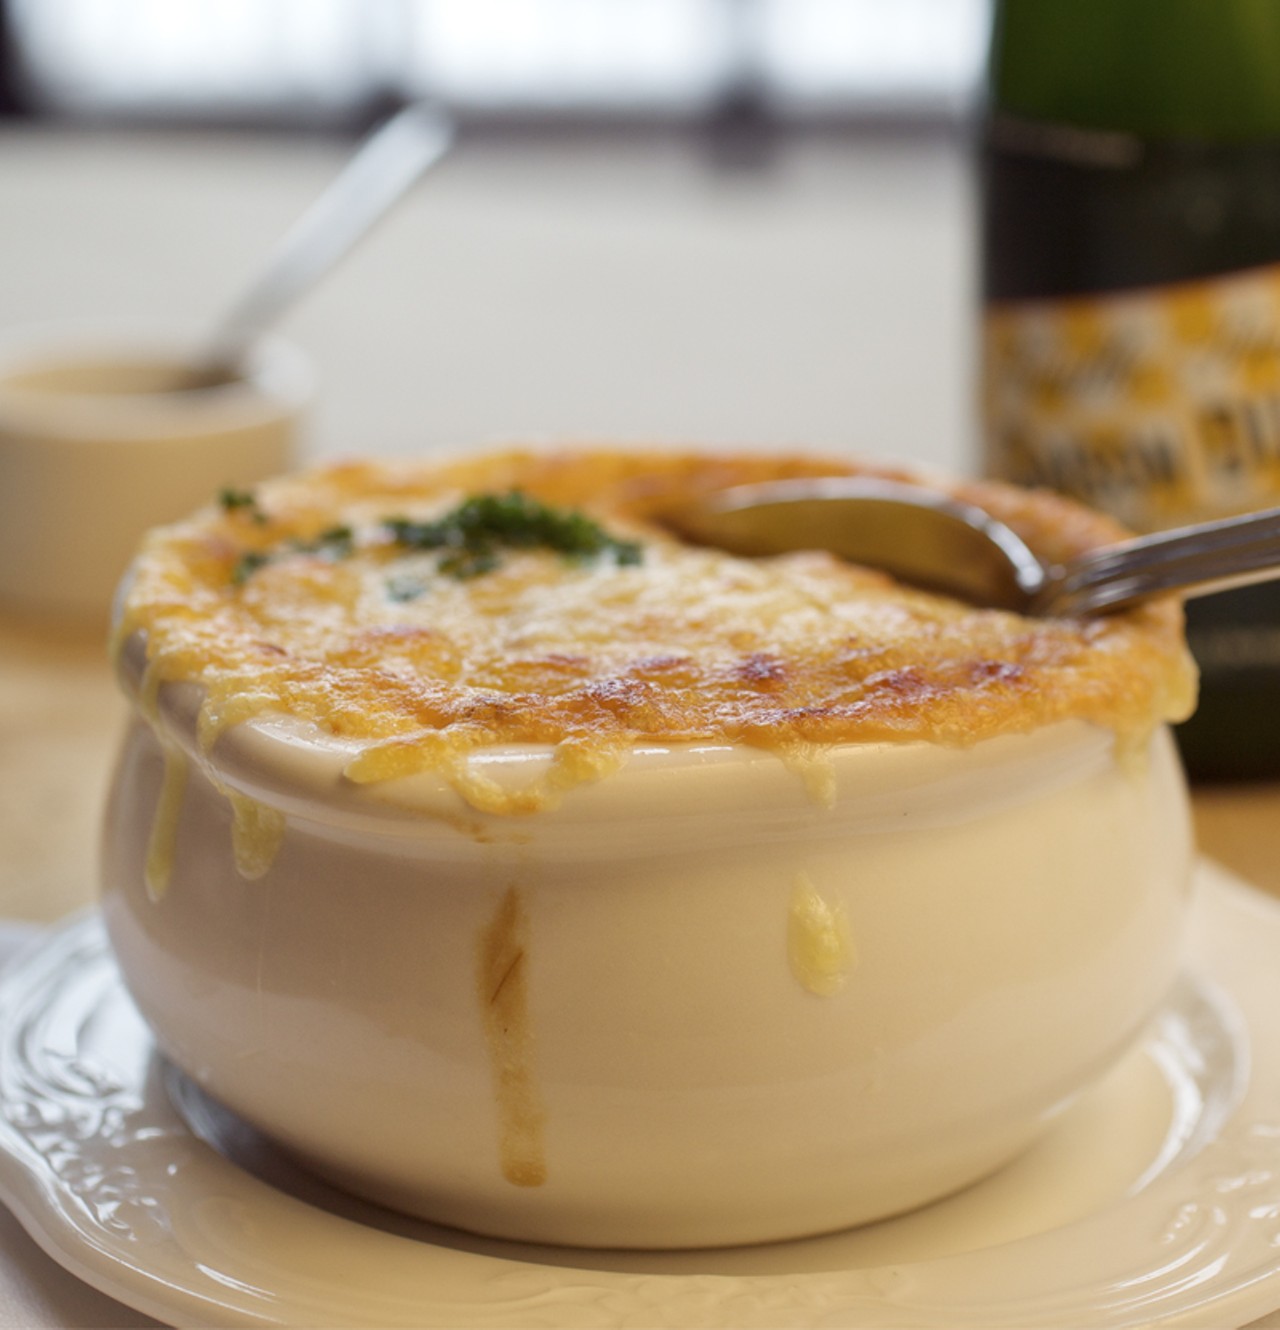 The onion soup, another one of the hors d&rsquo;oeuvres, is made with chicken stock, and is topped with a &ldquo;thick blanket of melted Gruy&egrave;re spilling over the edges of its crock.&rdquo; It is seen here with a Saison Dupont beer.